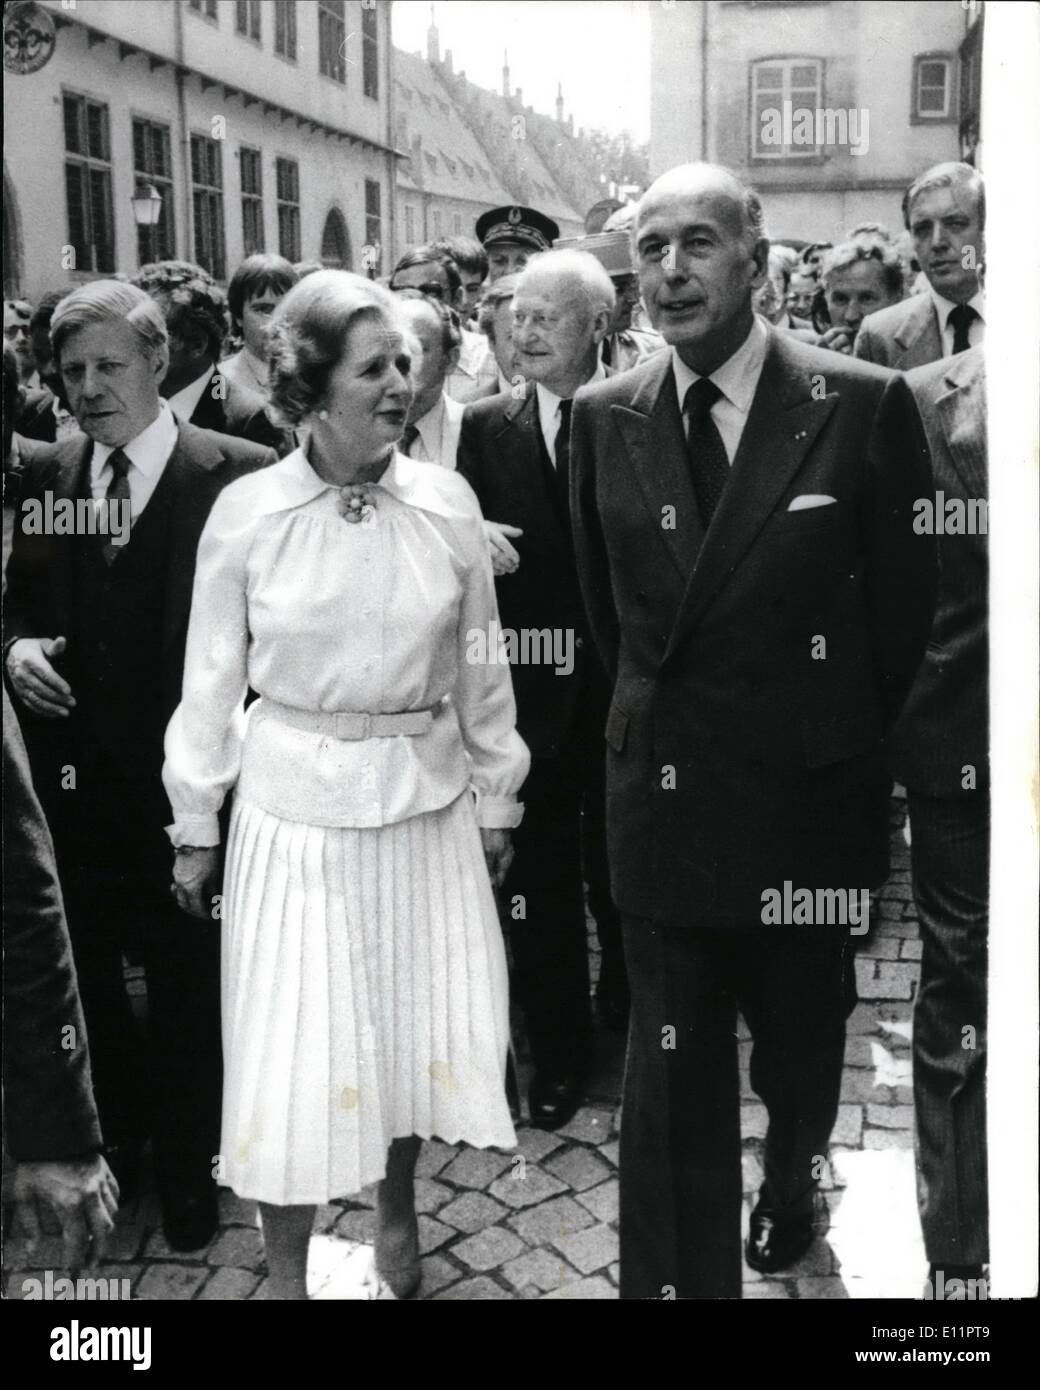 Jun. 06, 1979 - Maggie Thatcher In Strasboug: Prime Minister Maggie Thatcher seen during her walkabout yesterday with Chancellor Schmidt (left) and President Giscard, in Starabourg. She is there for a European Summit. Stock Photo